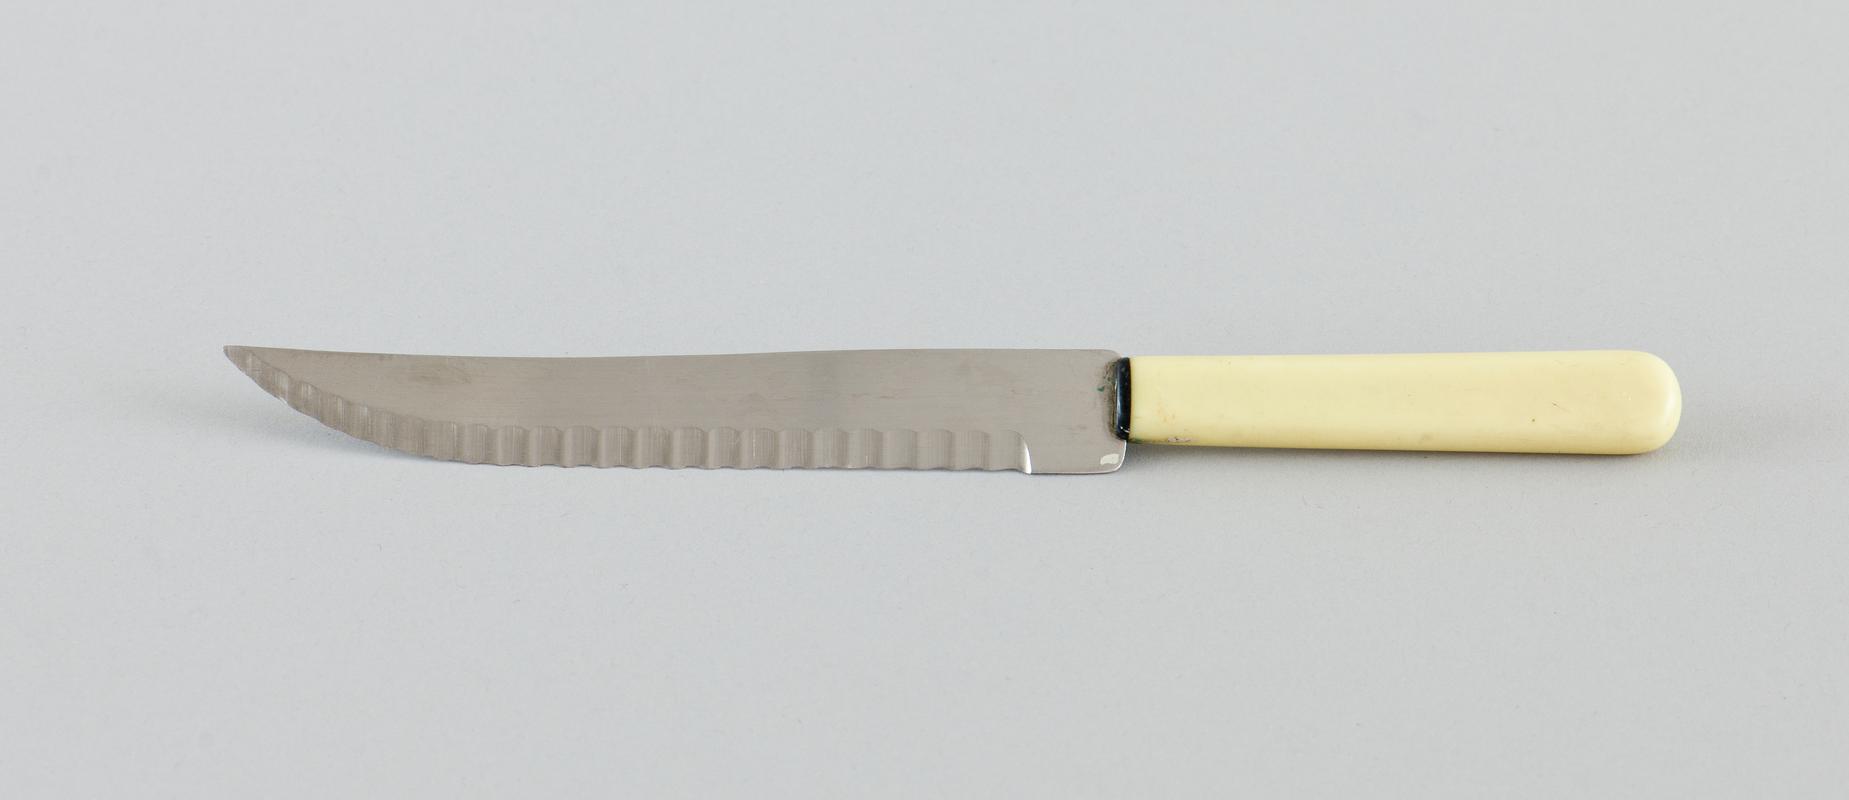 Preparation knife. Serrated blade on curved edge with cream plastic handle.